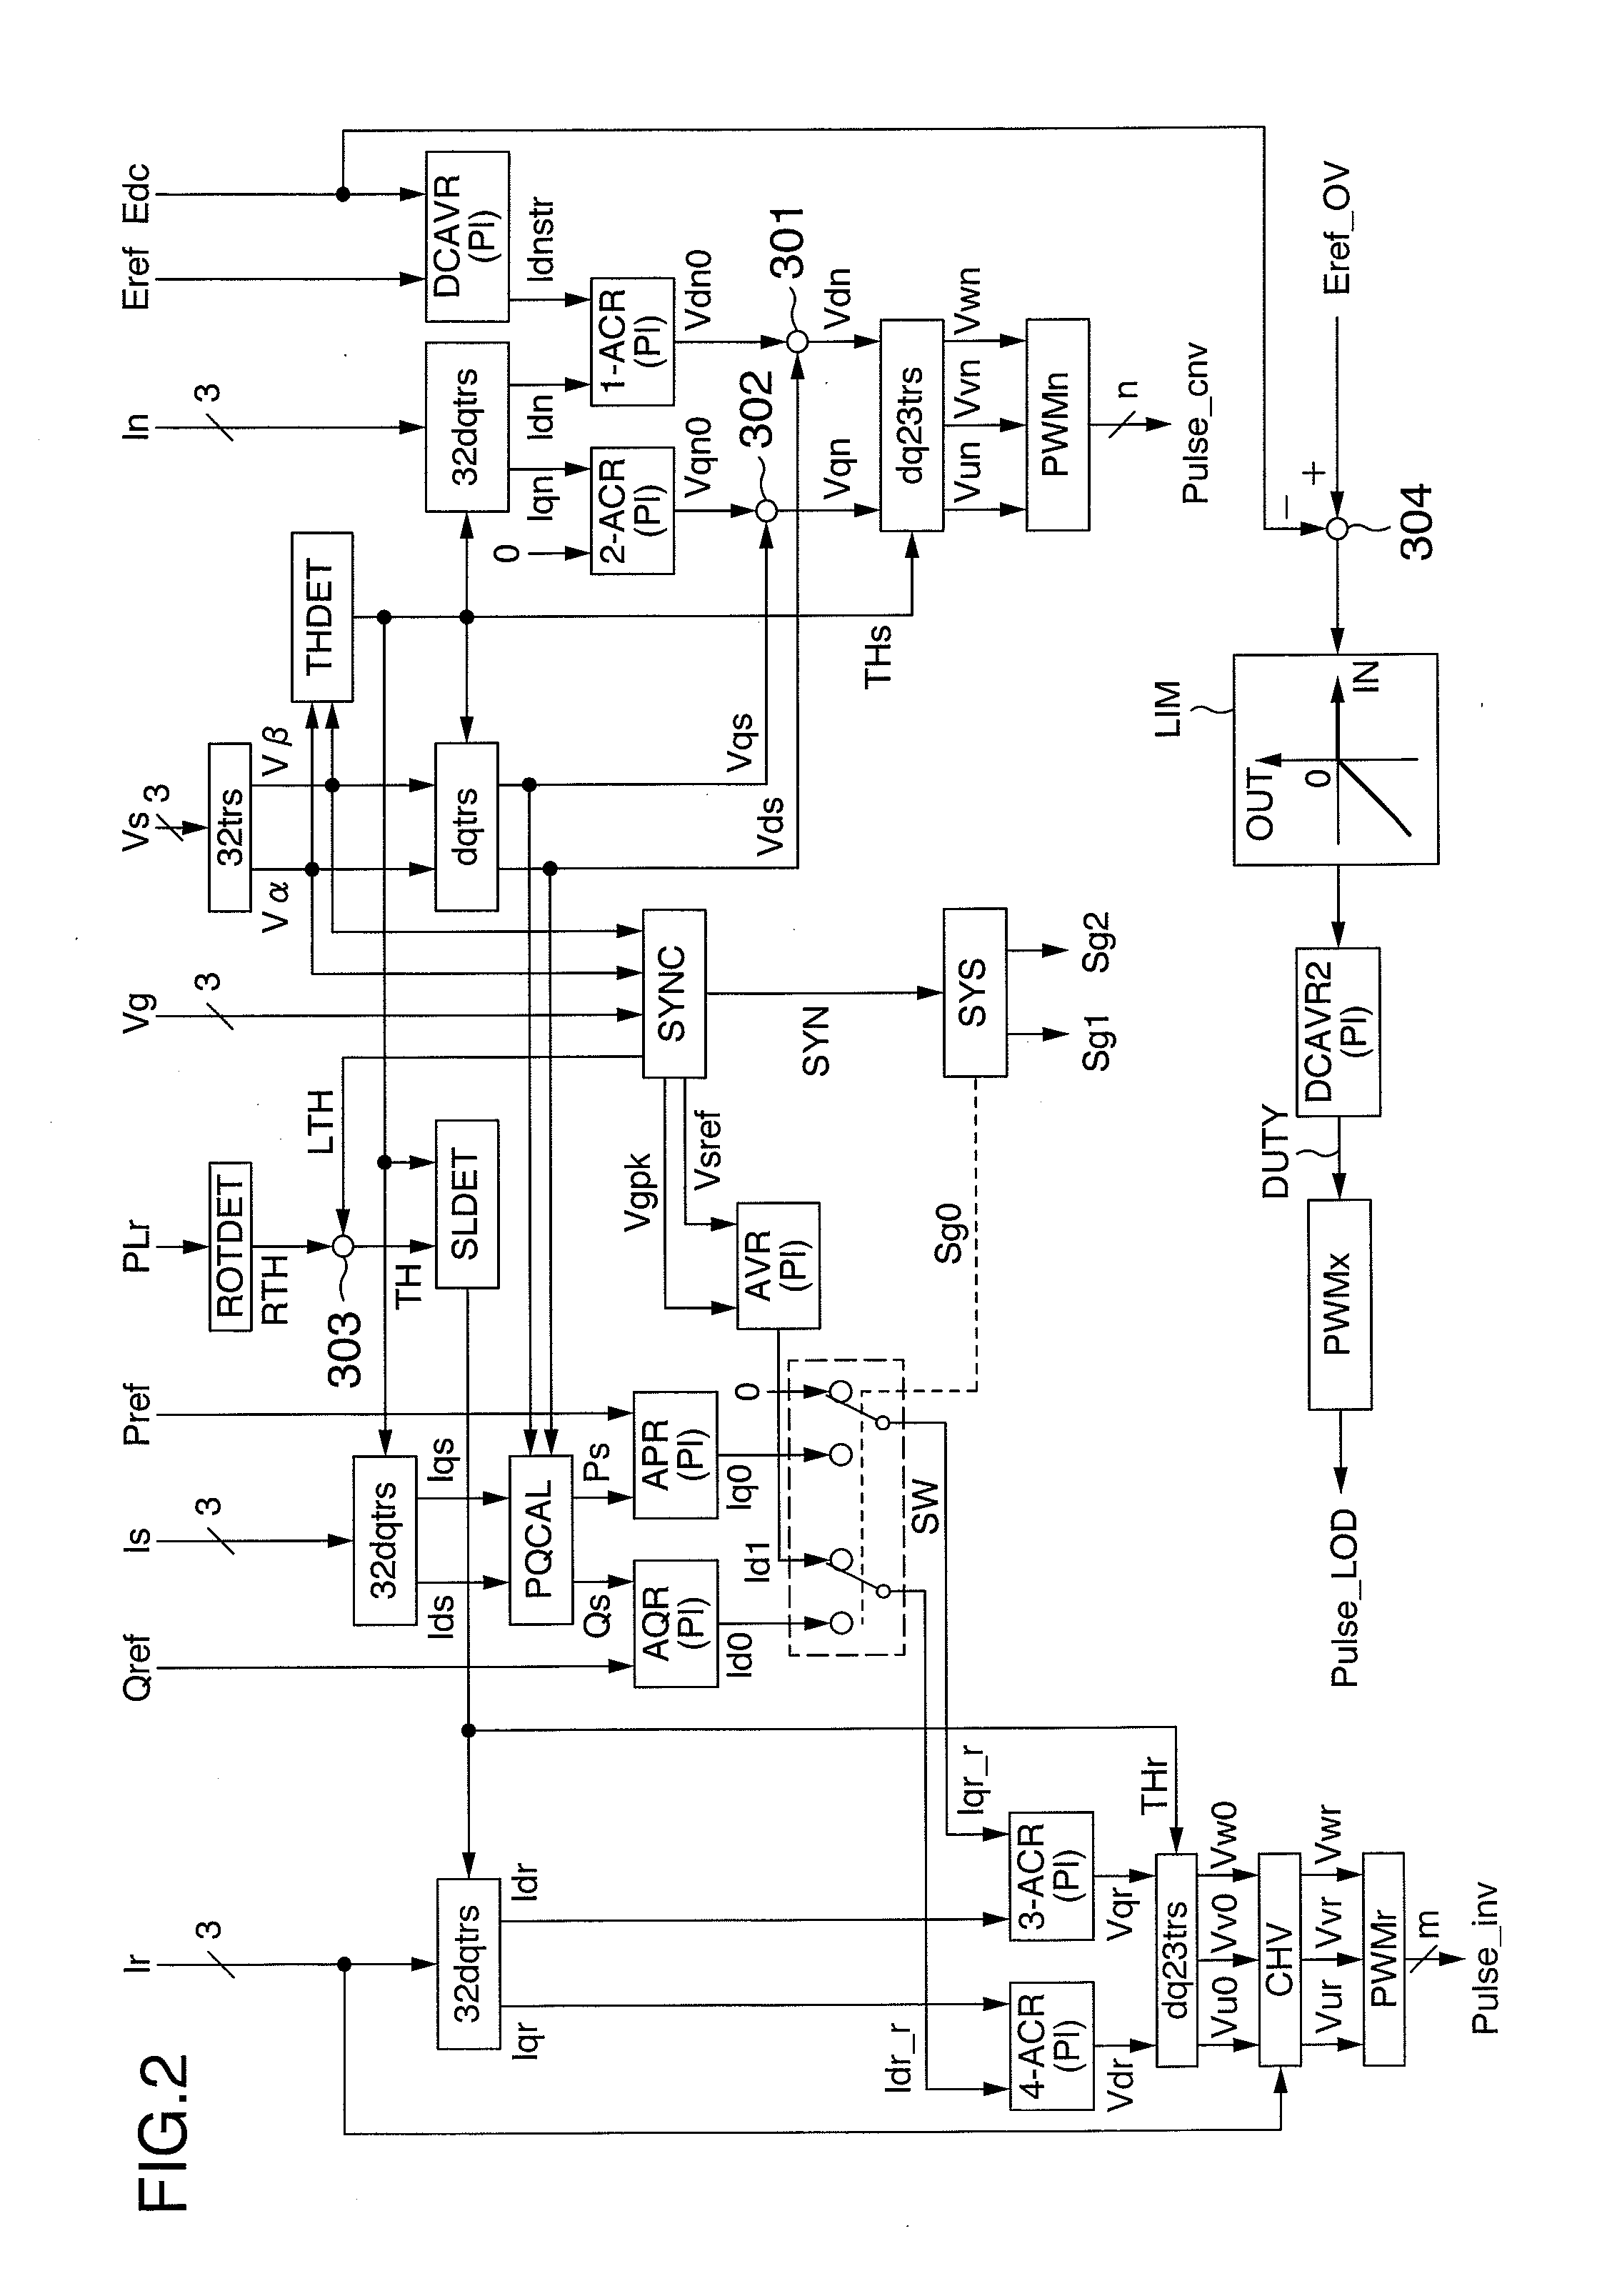 Power converter for doubly-fed power generator system